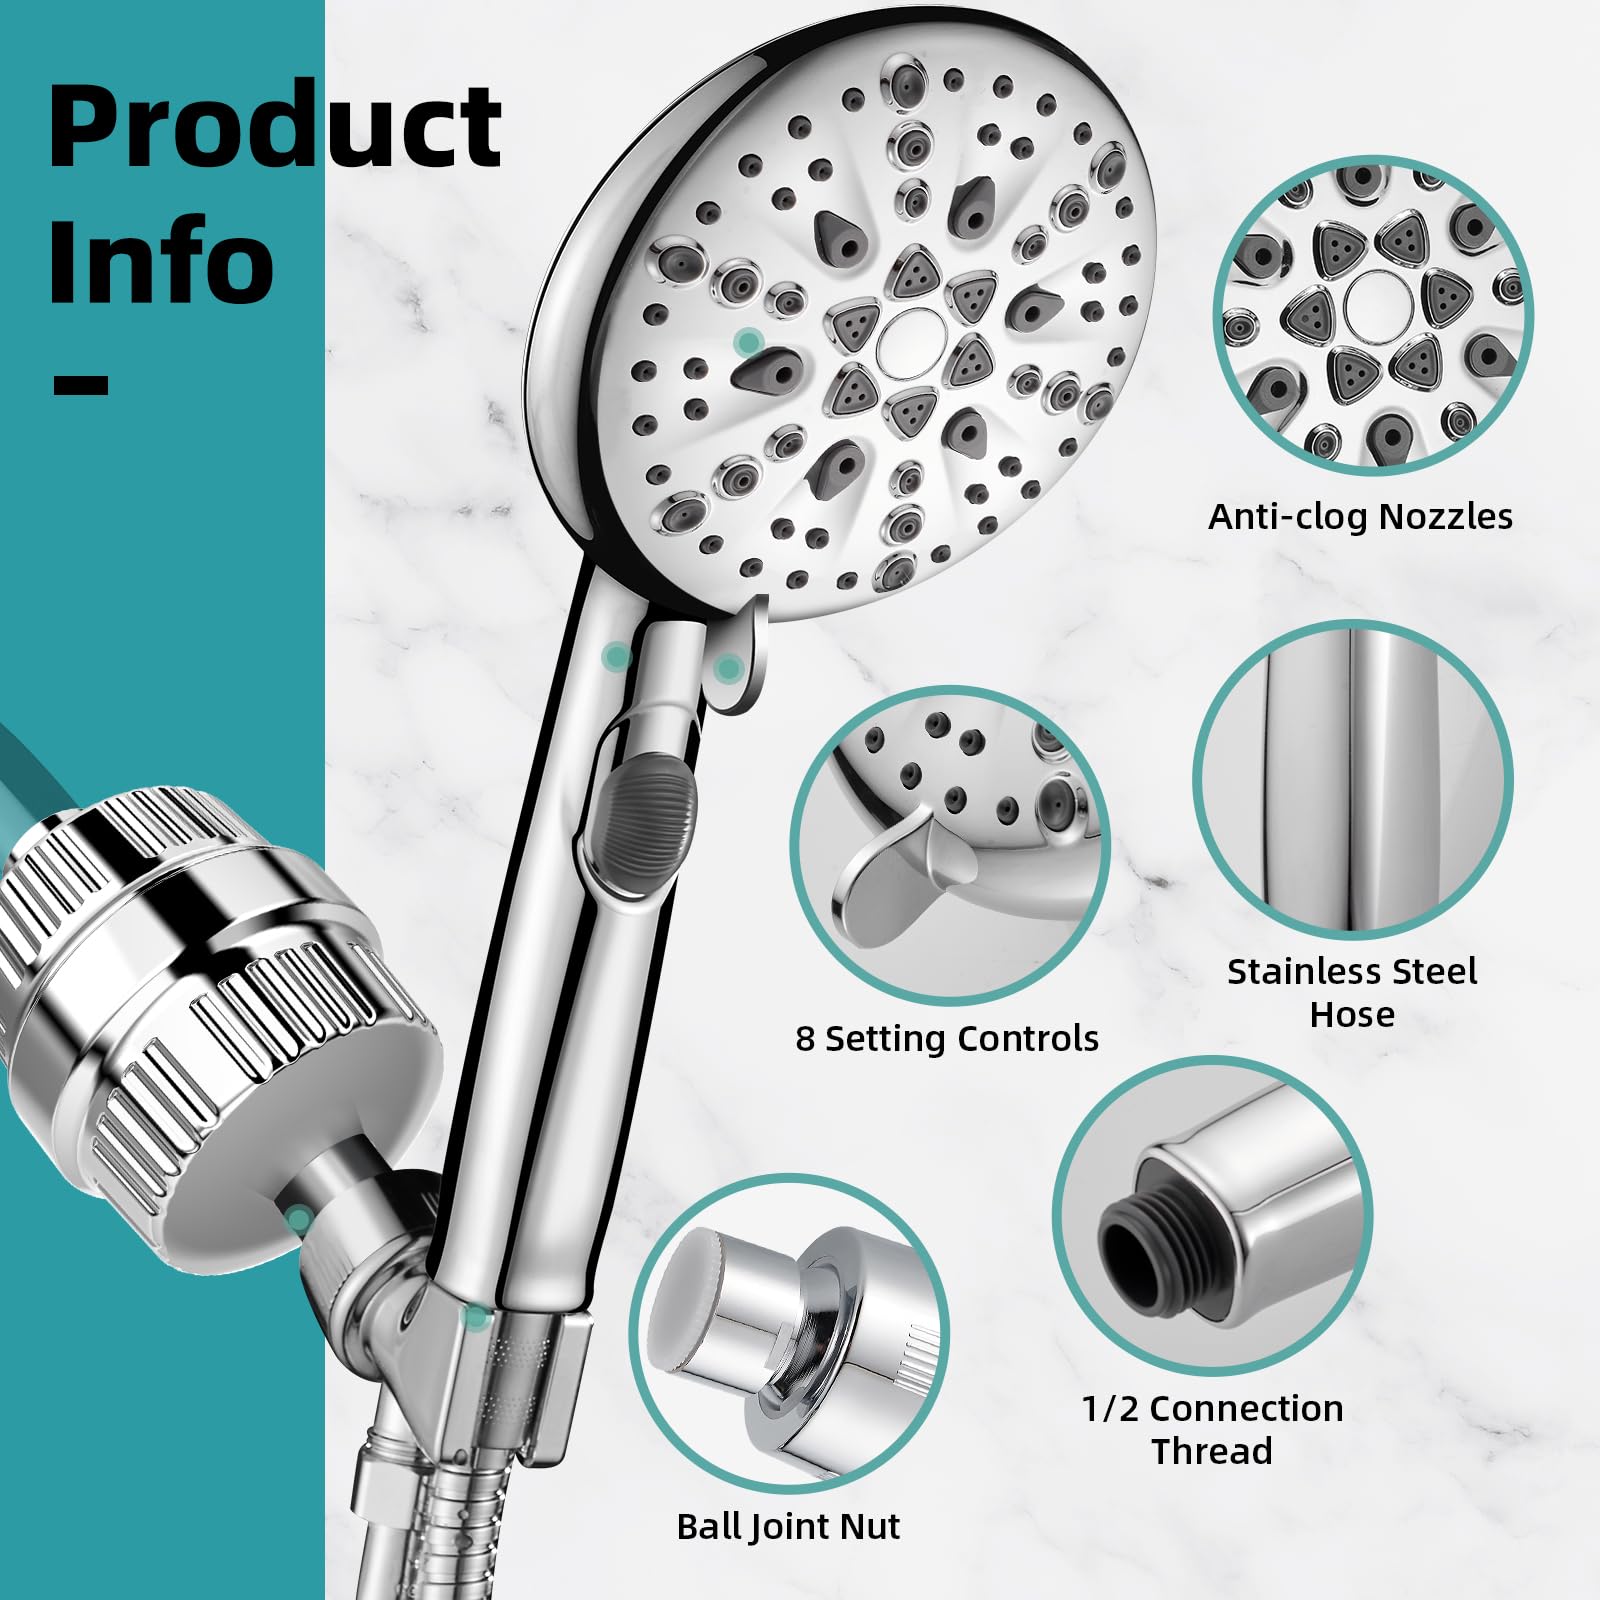 Cobbe High Pressure 9-Modes Filtered Shower Head - with 20 Stage Shower Filter for Hard Water, Removes Chlorine and Harmful Substances, Built-in Power Spray, Chrome